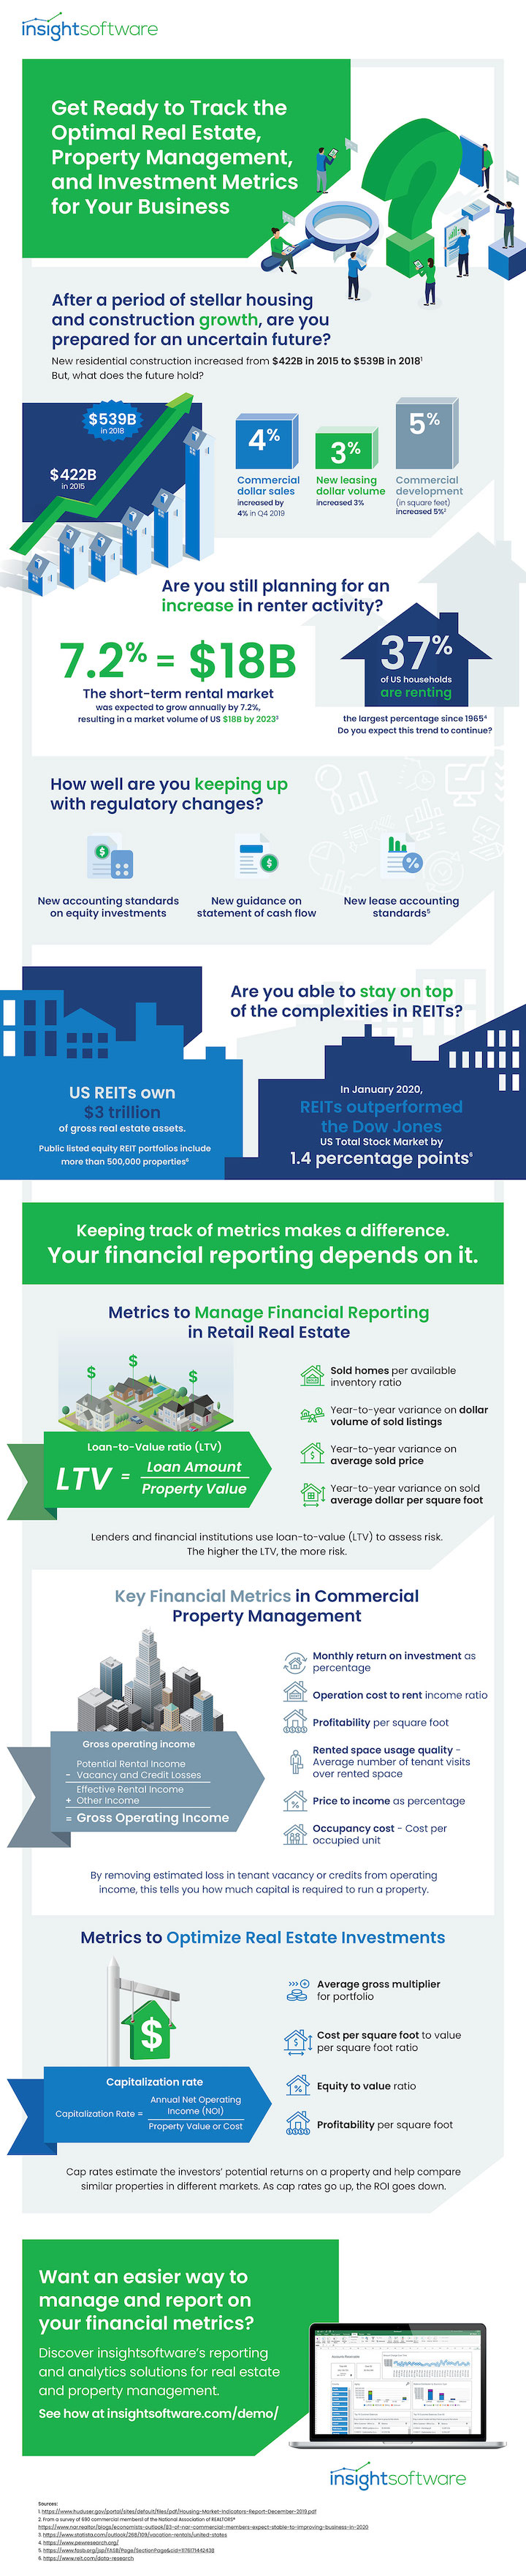 Insightsoftware Real Estate Infographic